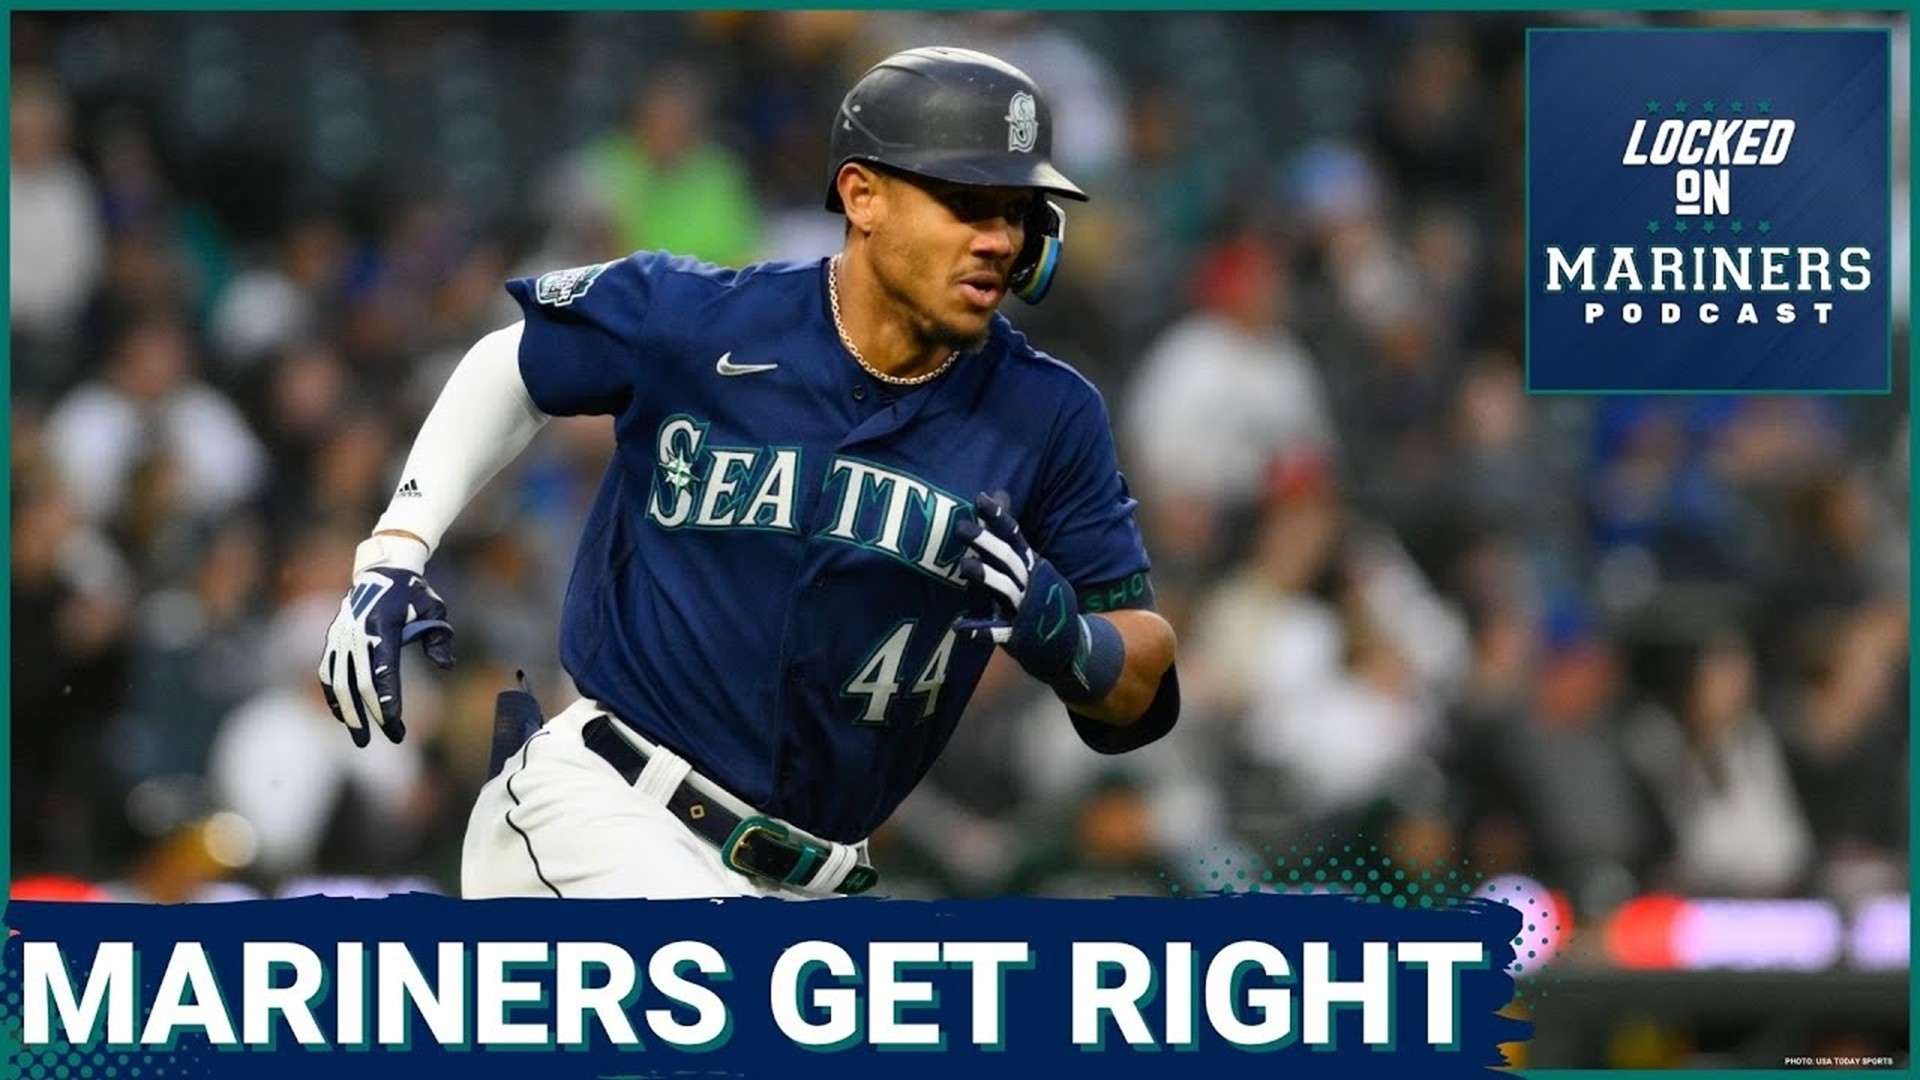 That was a resounding win! The Seattle Mariners came off a disappointing end to their 9-game road trip needing a win against the hapless Oakland A's.